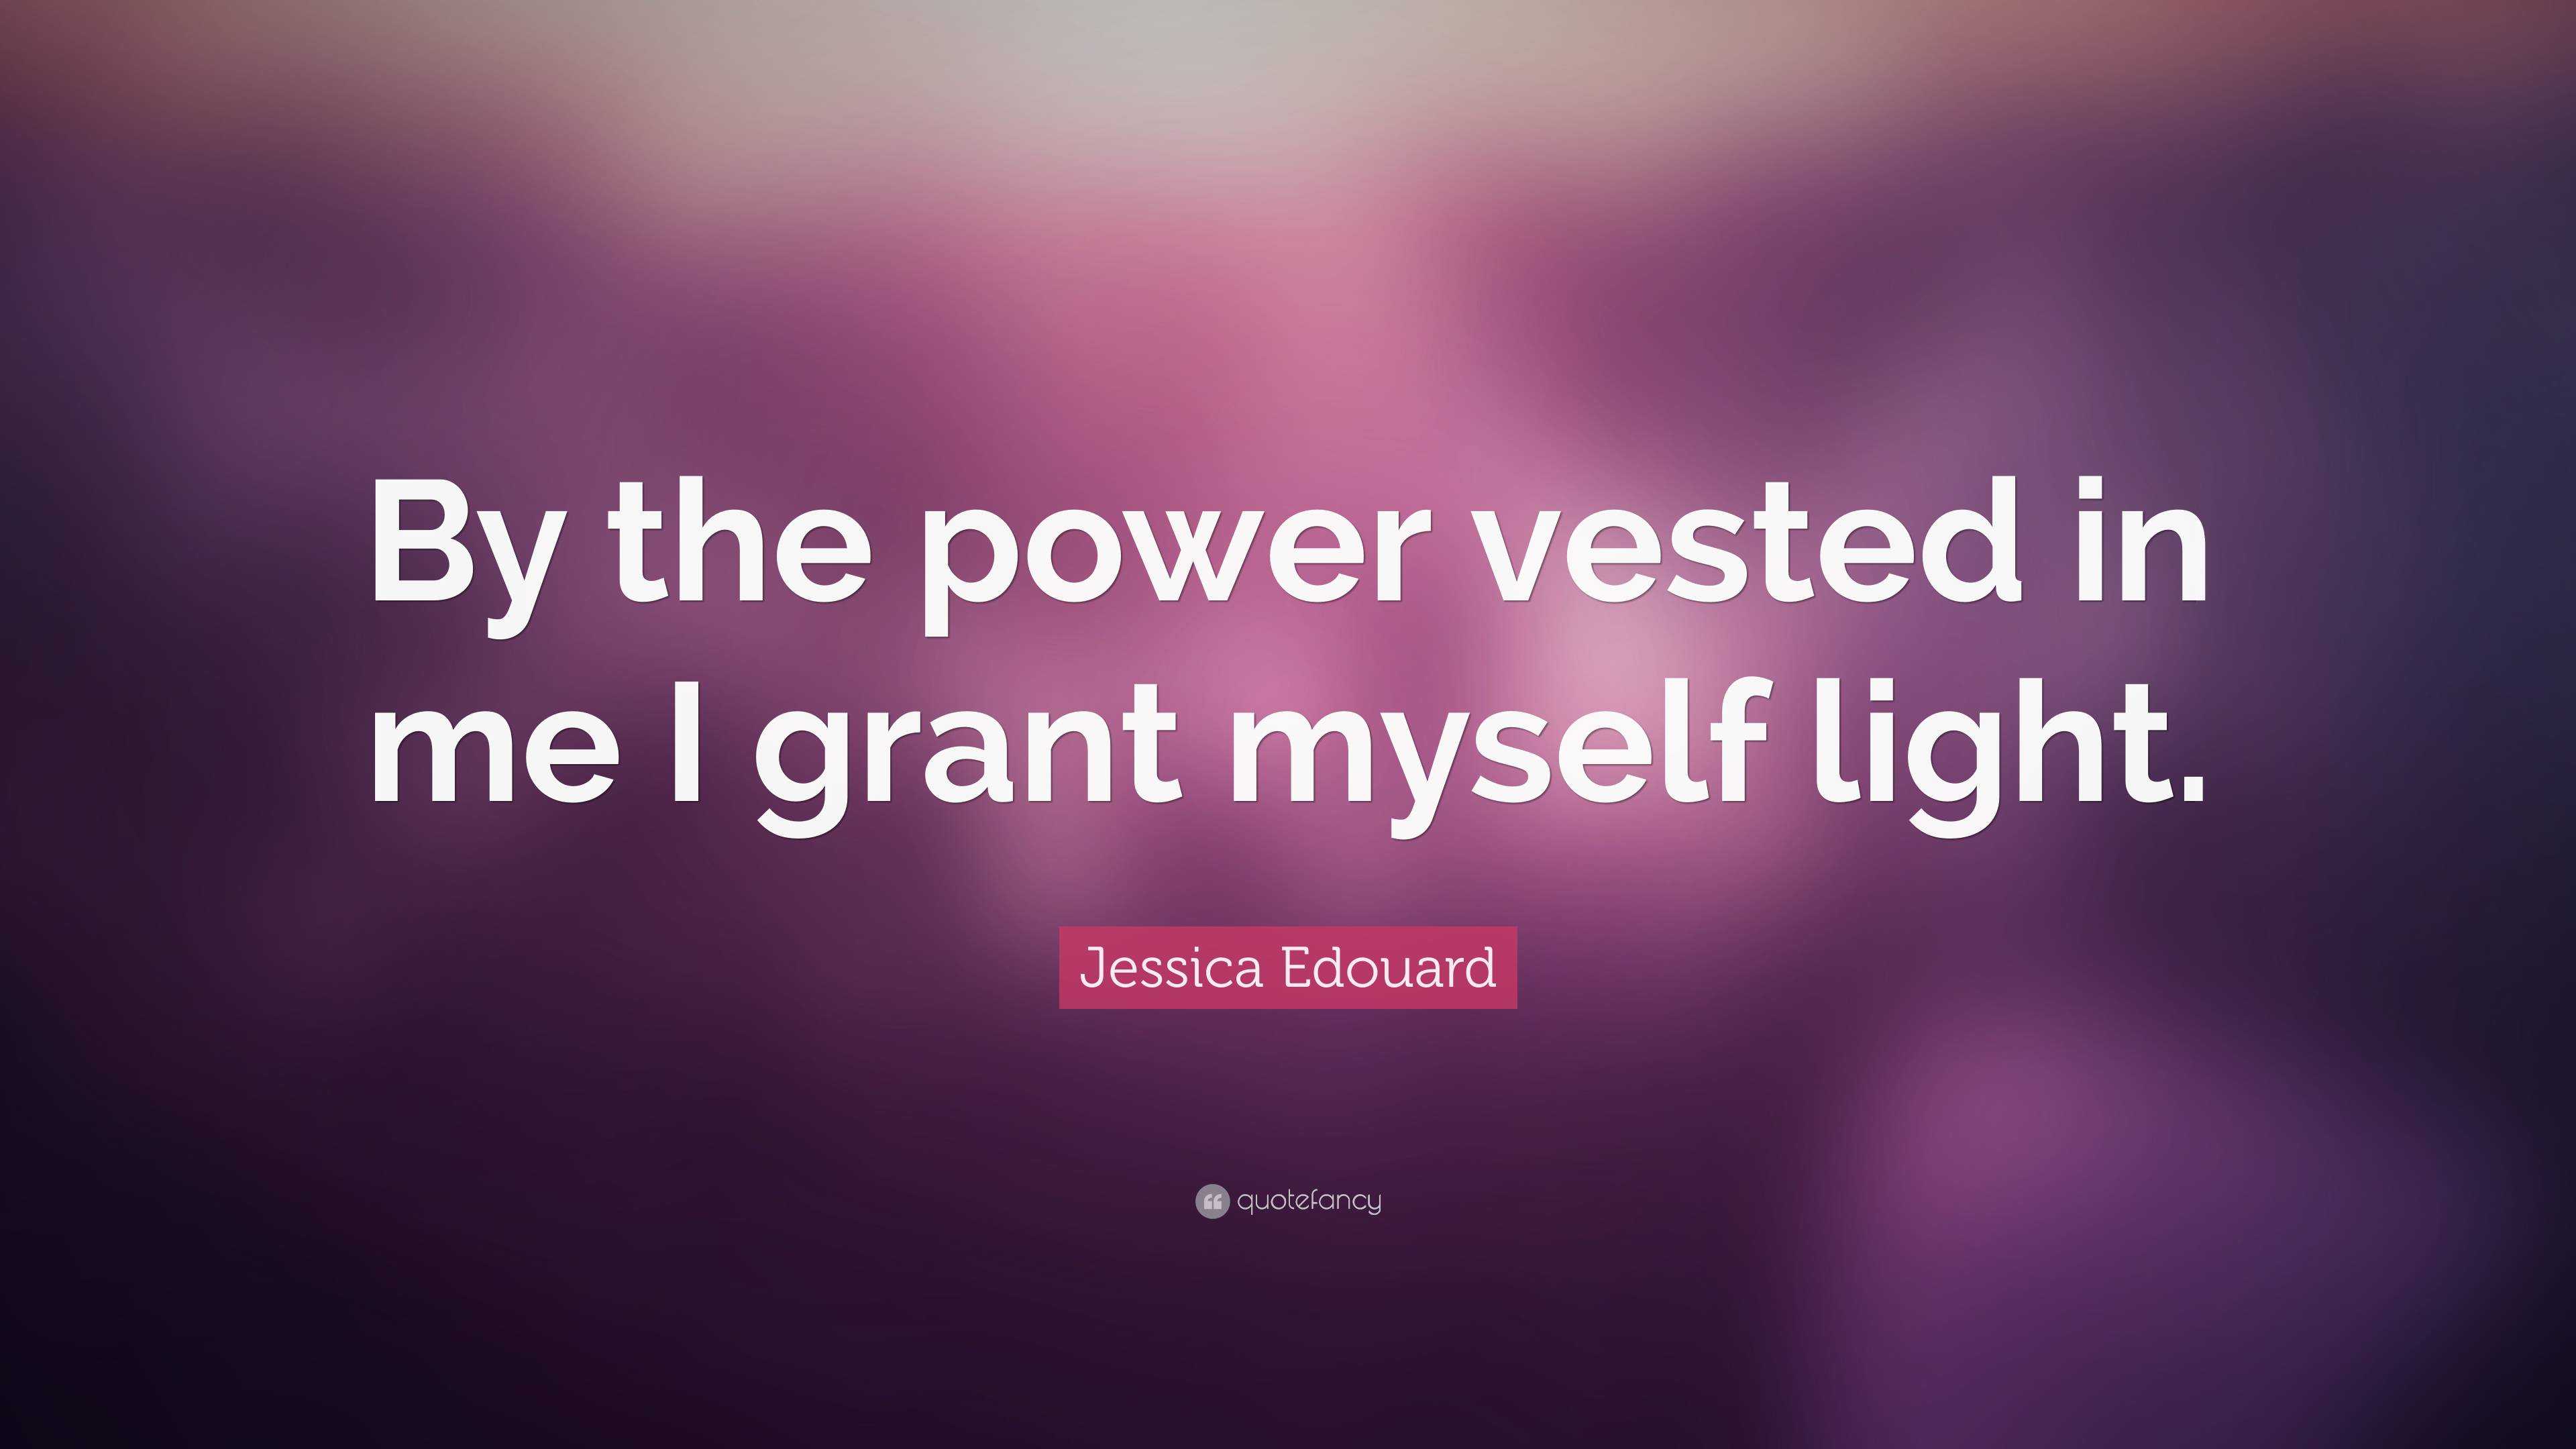 Alperne midlertidig delikat Jessica Edouard Quote: “By the power vested in me I grant myself light.”